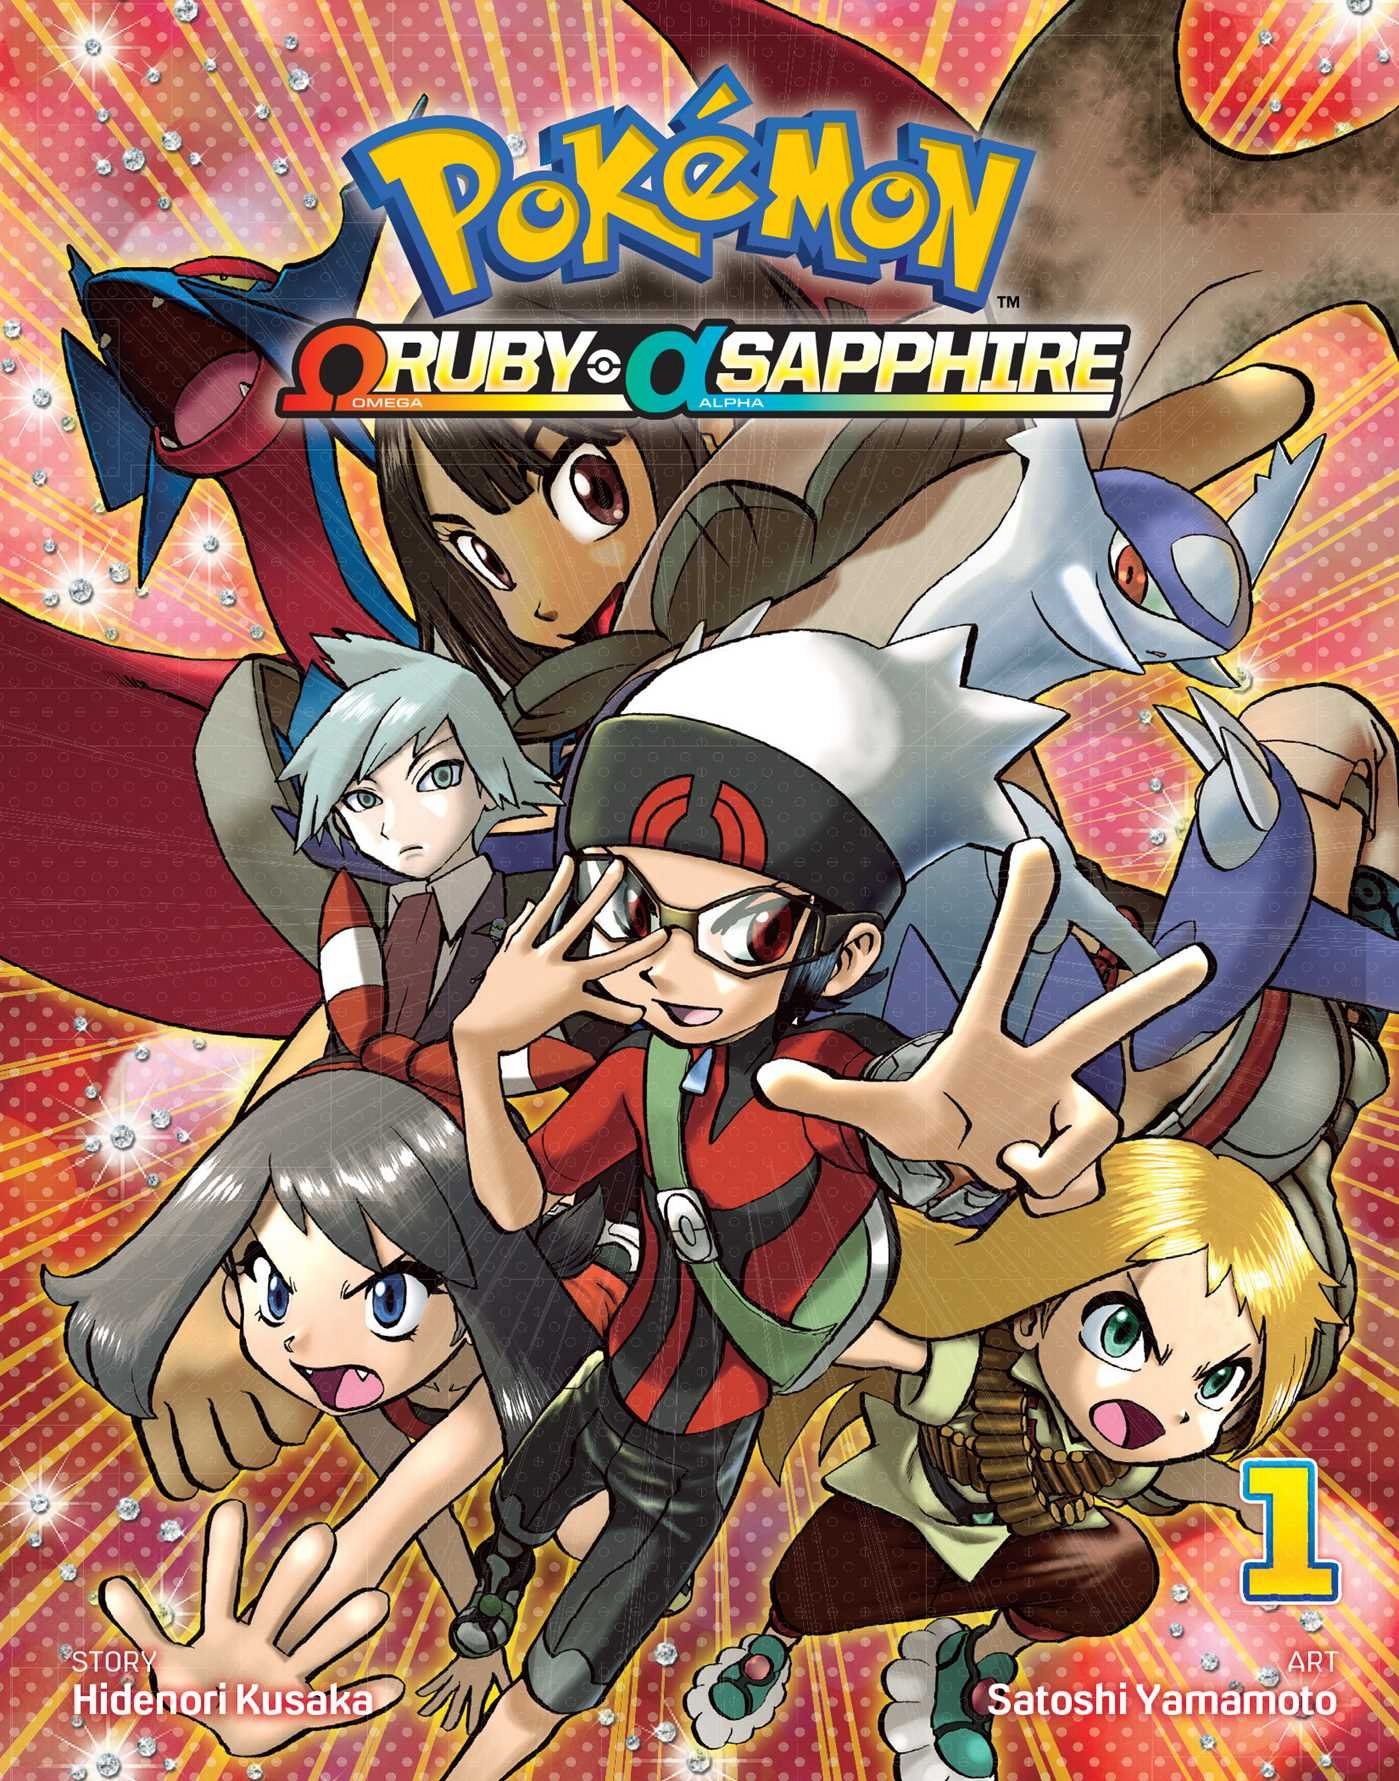 VIZ  Read a Free Preview of Pokémon Adventures: HeartGold and SoulSilver,  Vol. 2